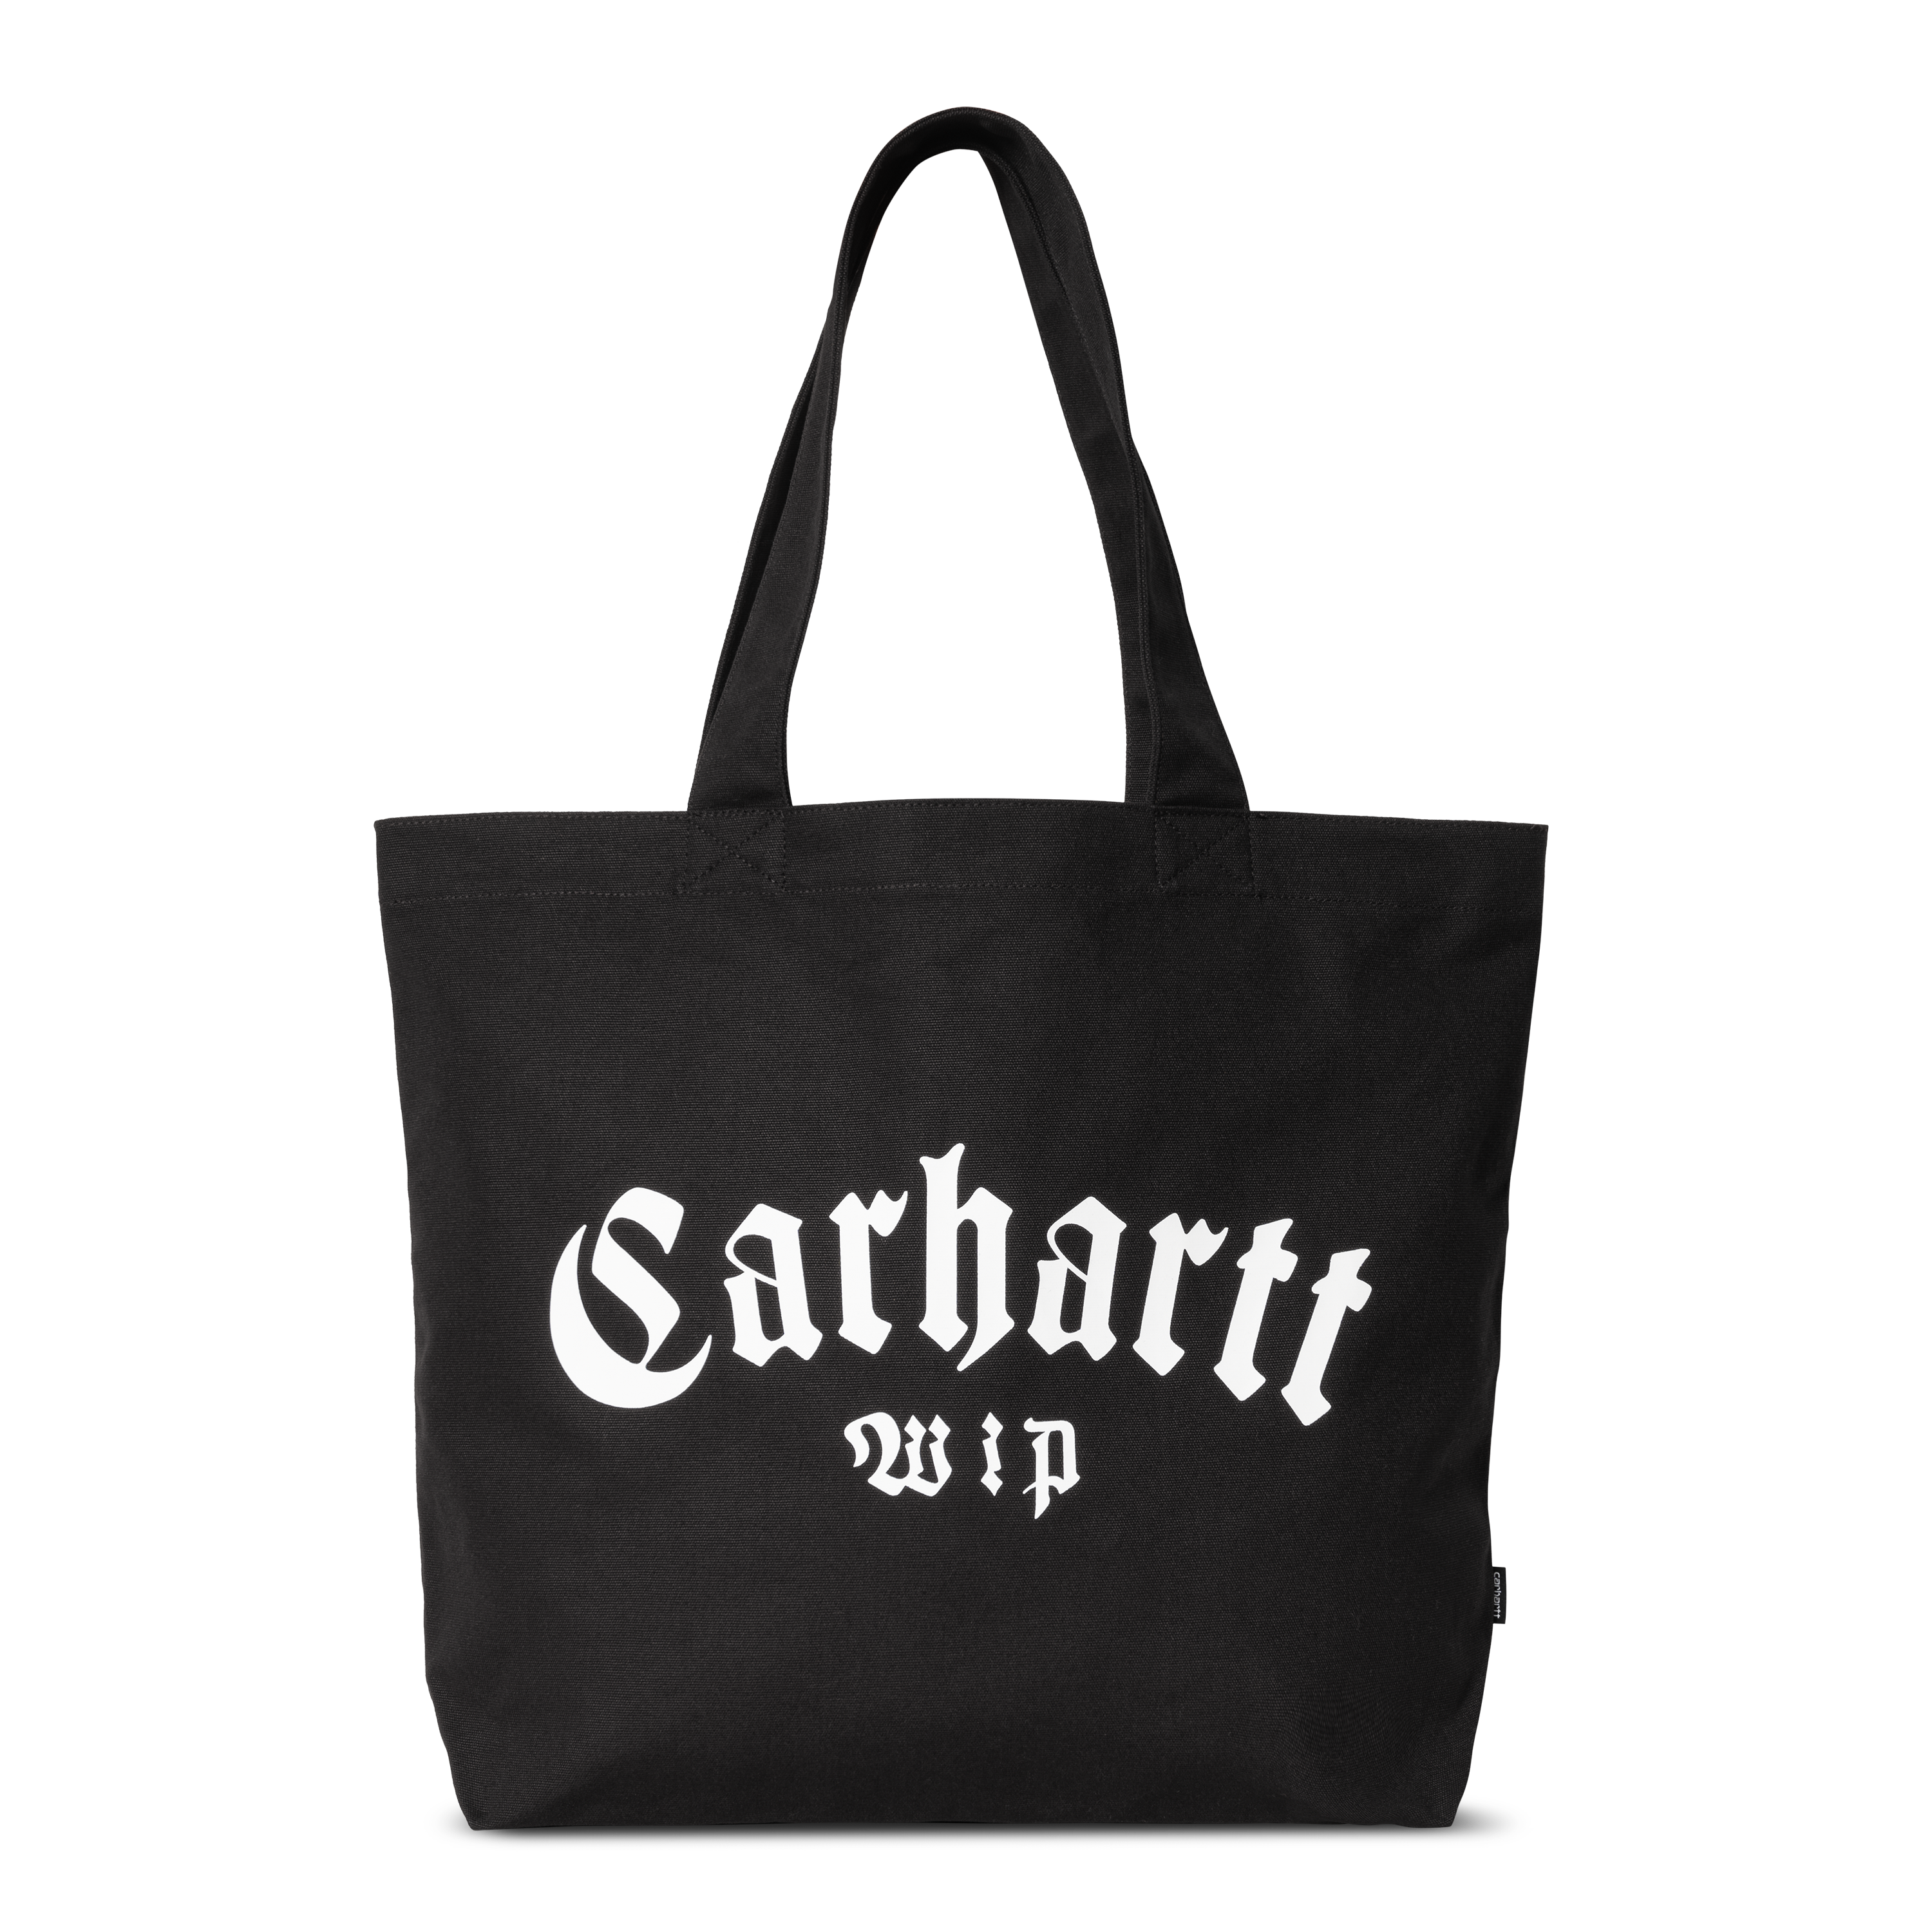 Carhartt WIP Canvas Graphic Tote Large Noir